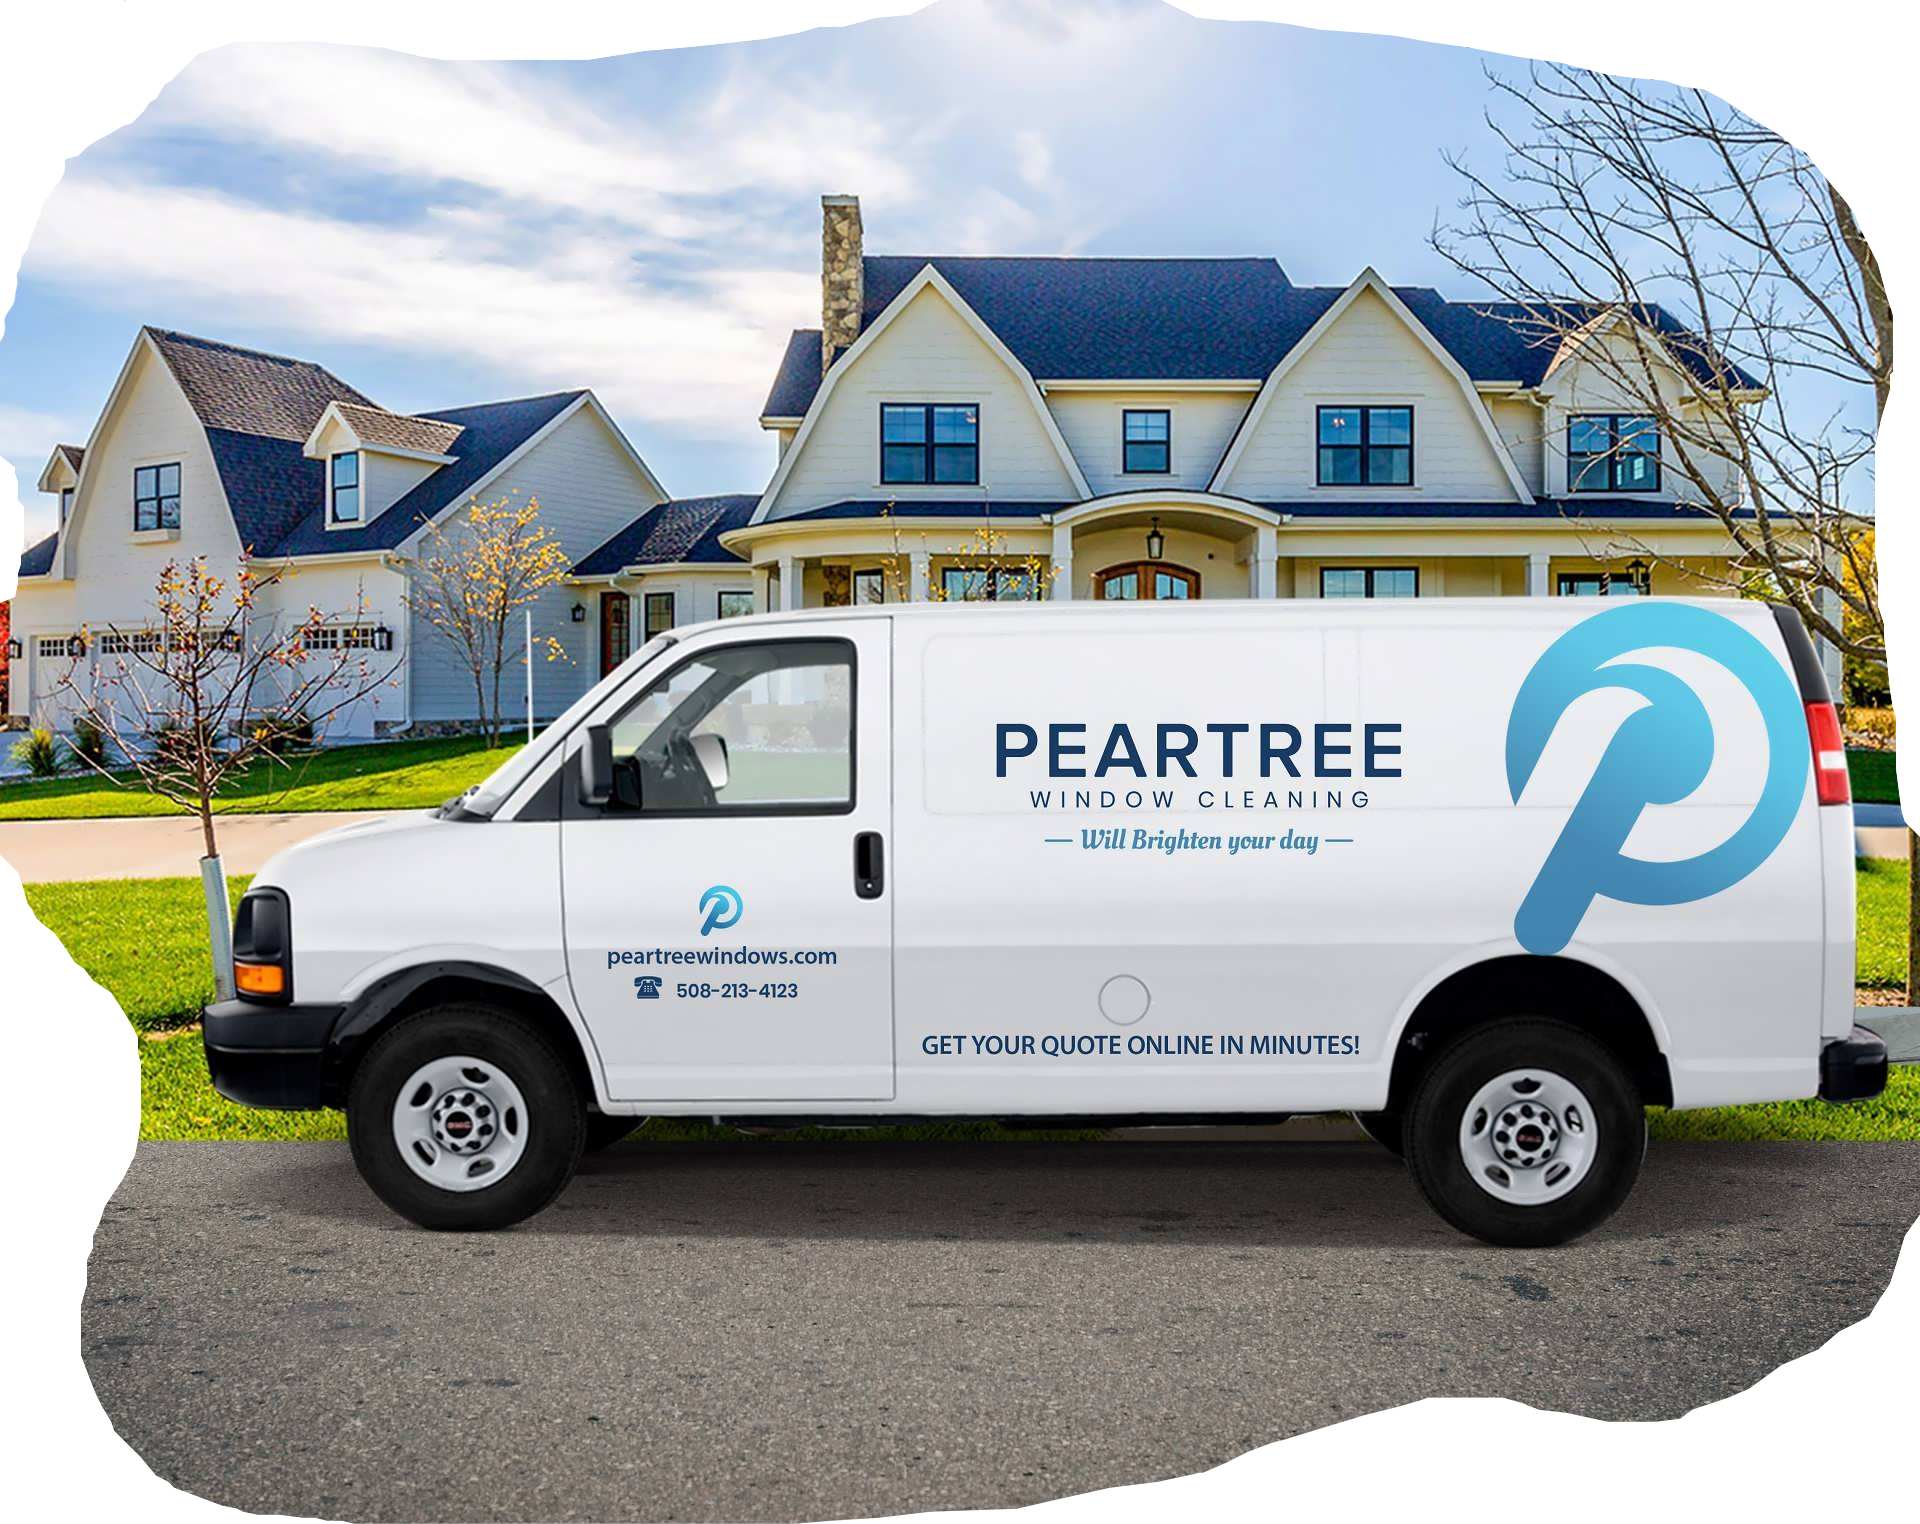 Contact Us For Residential & Commercial Cleaning Services in Cape Cod